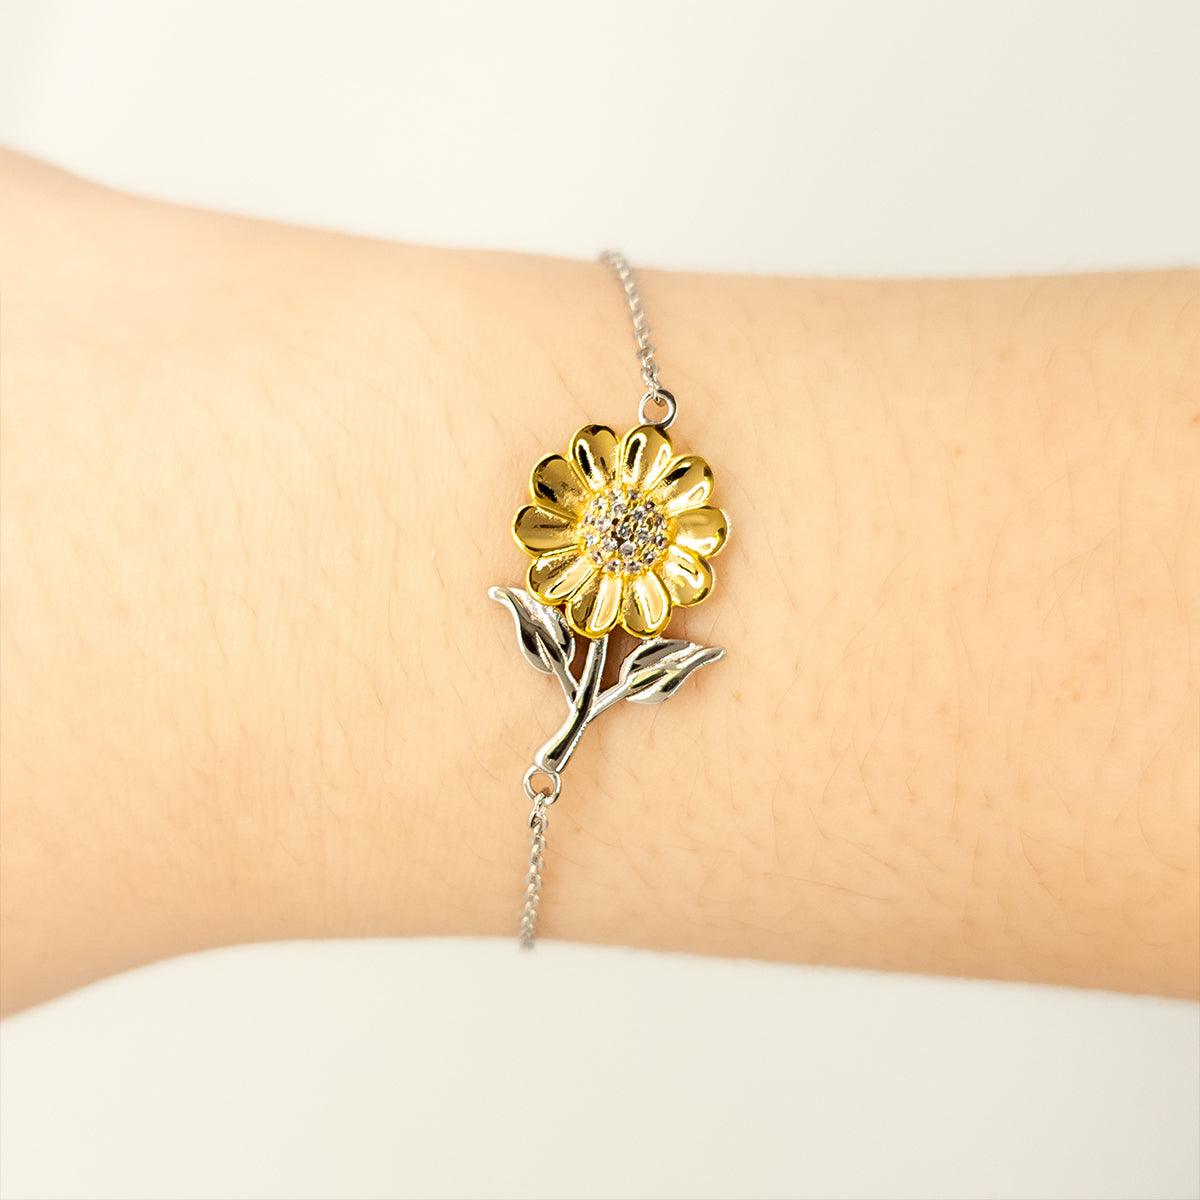 Sunflower Bracelet for Wife Present, Wife Always follow your dreams, never forget how amazing you are, Wife Birthday Christmas Gifts Jewelry for Girls Boys Teen Men Women - Mallard Moon Gift Shop